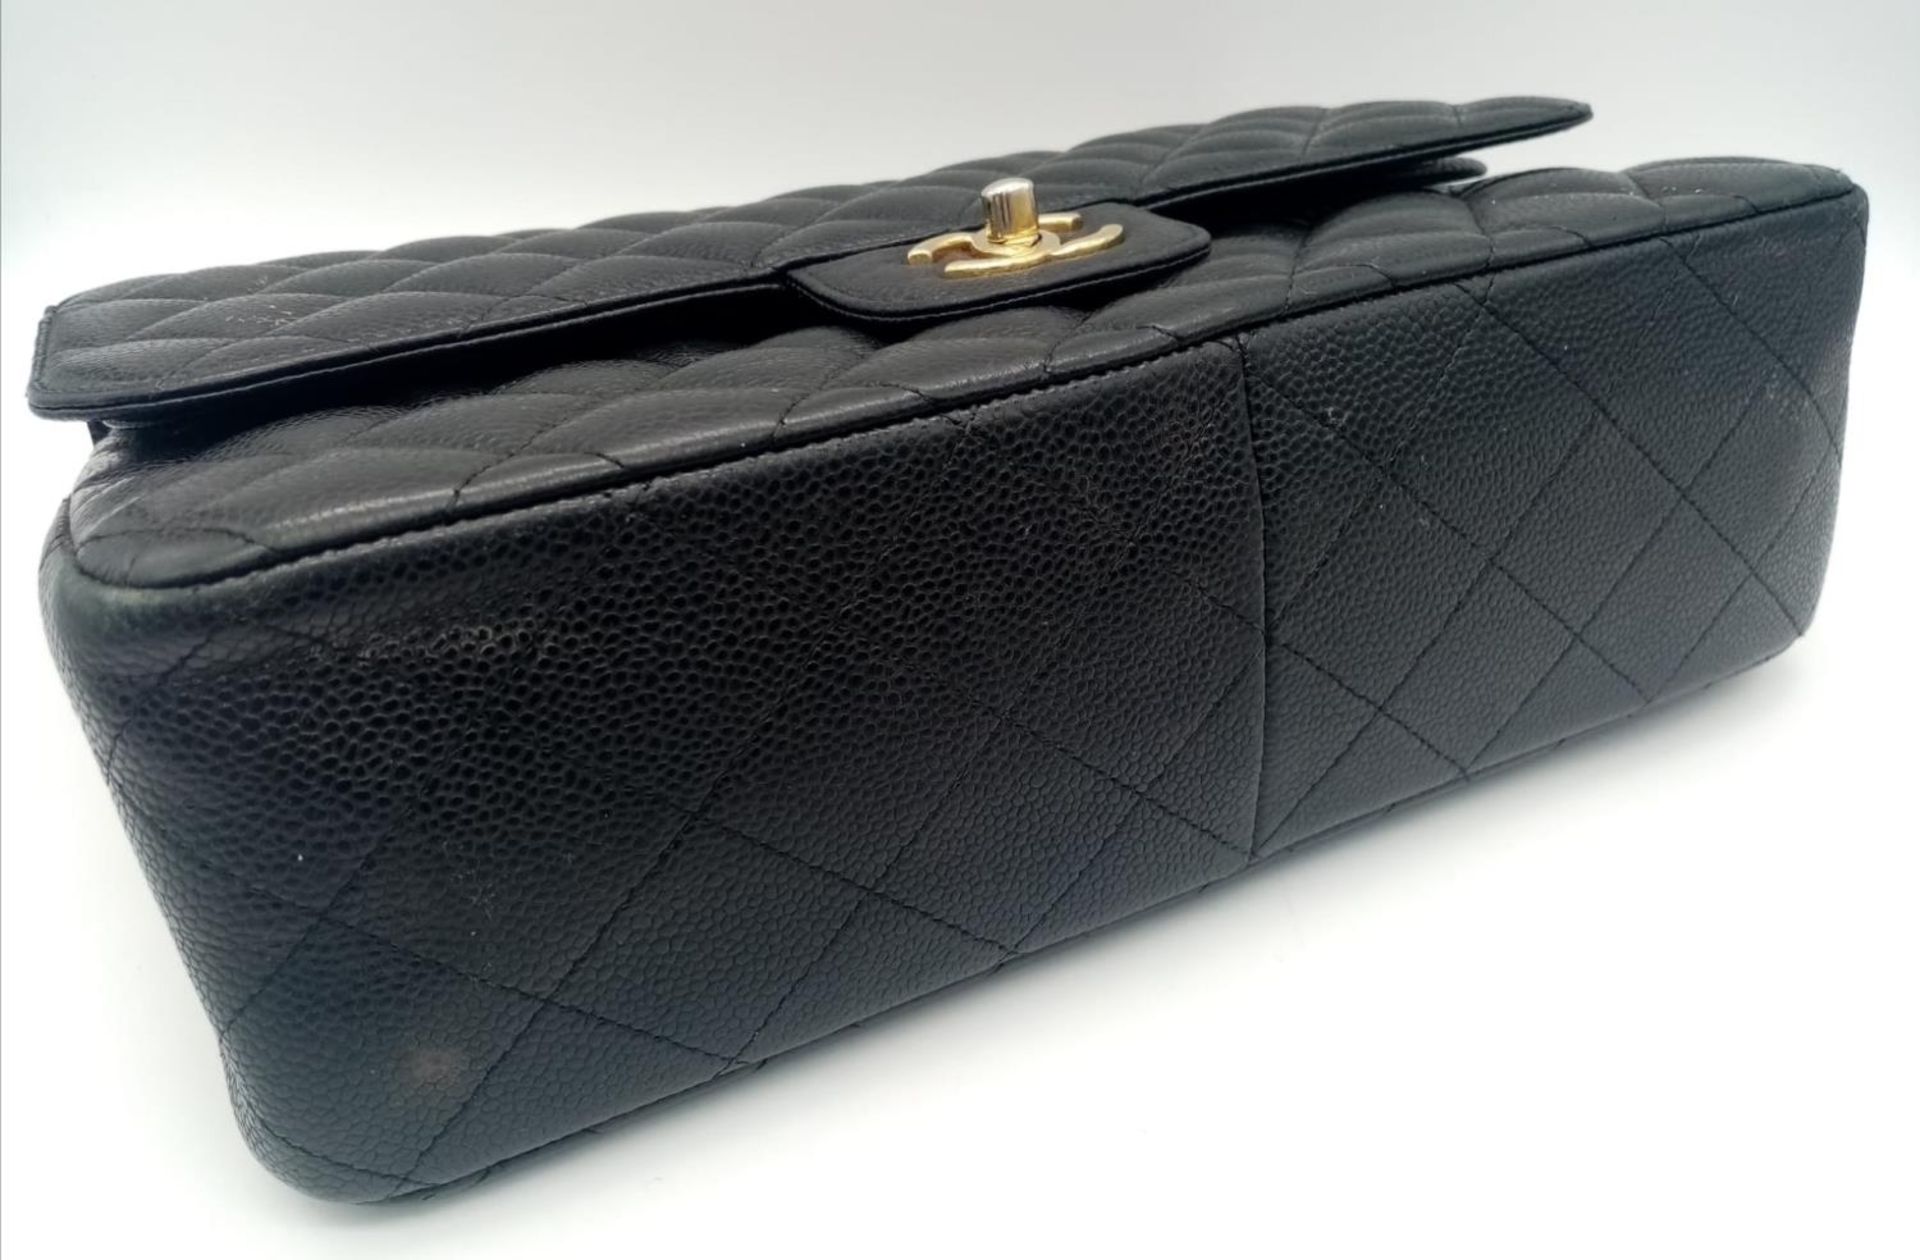 A Chanel Black Caviar Classic Double Flap Bag. Quilted pebbled leather exterior with gold-toned - Image 5 of 11